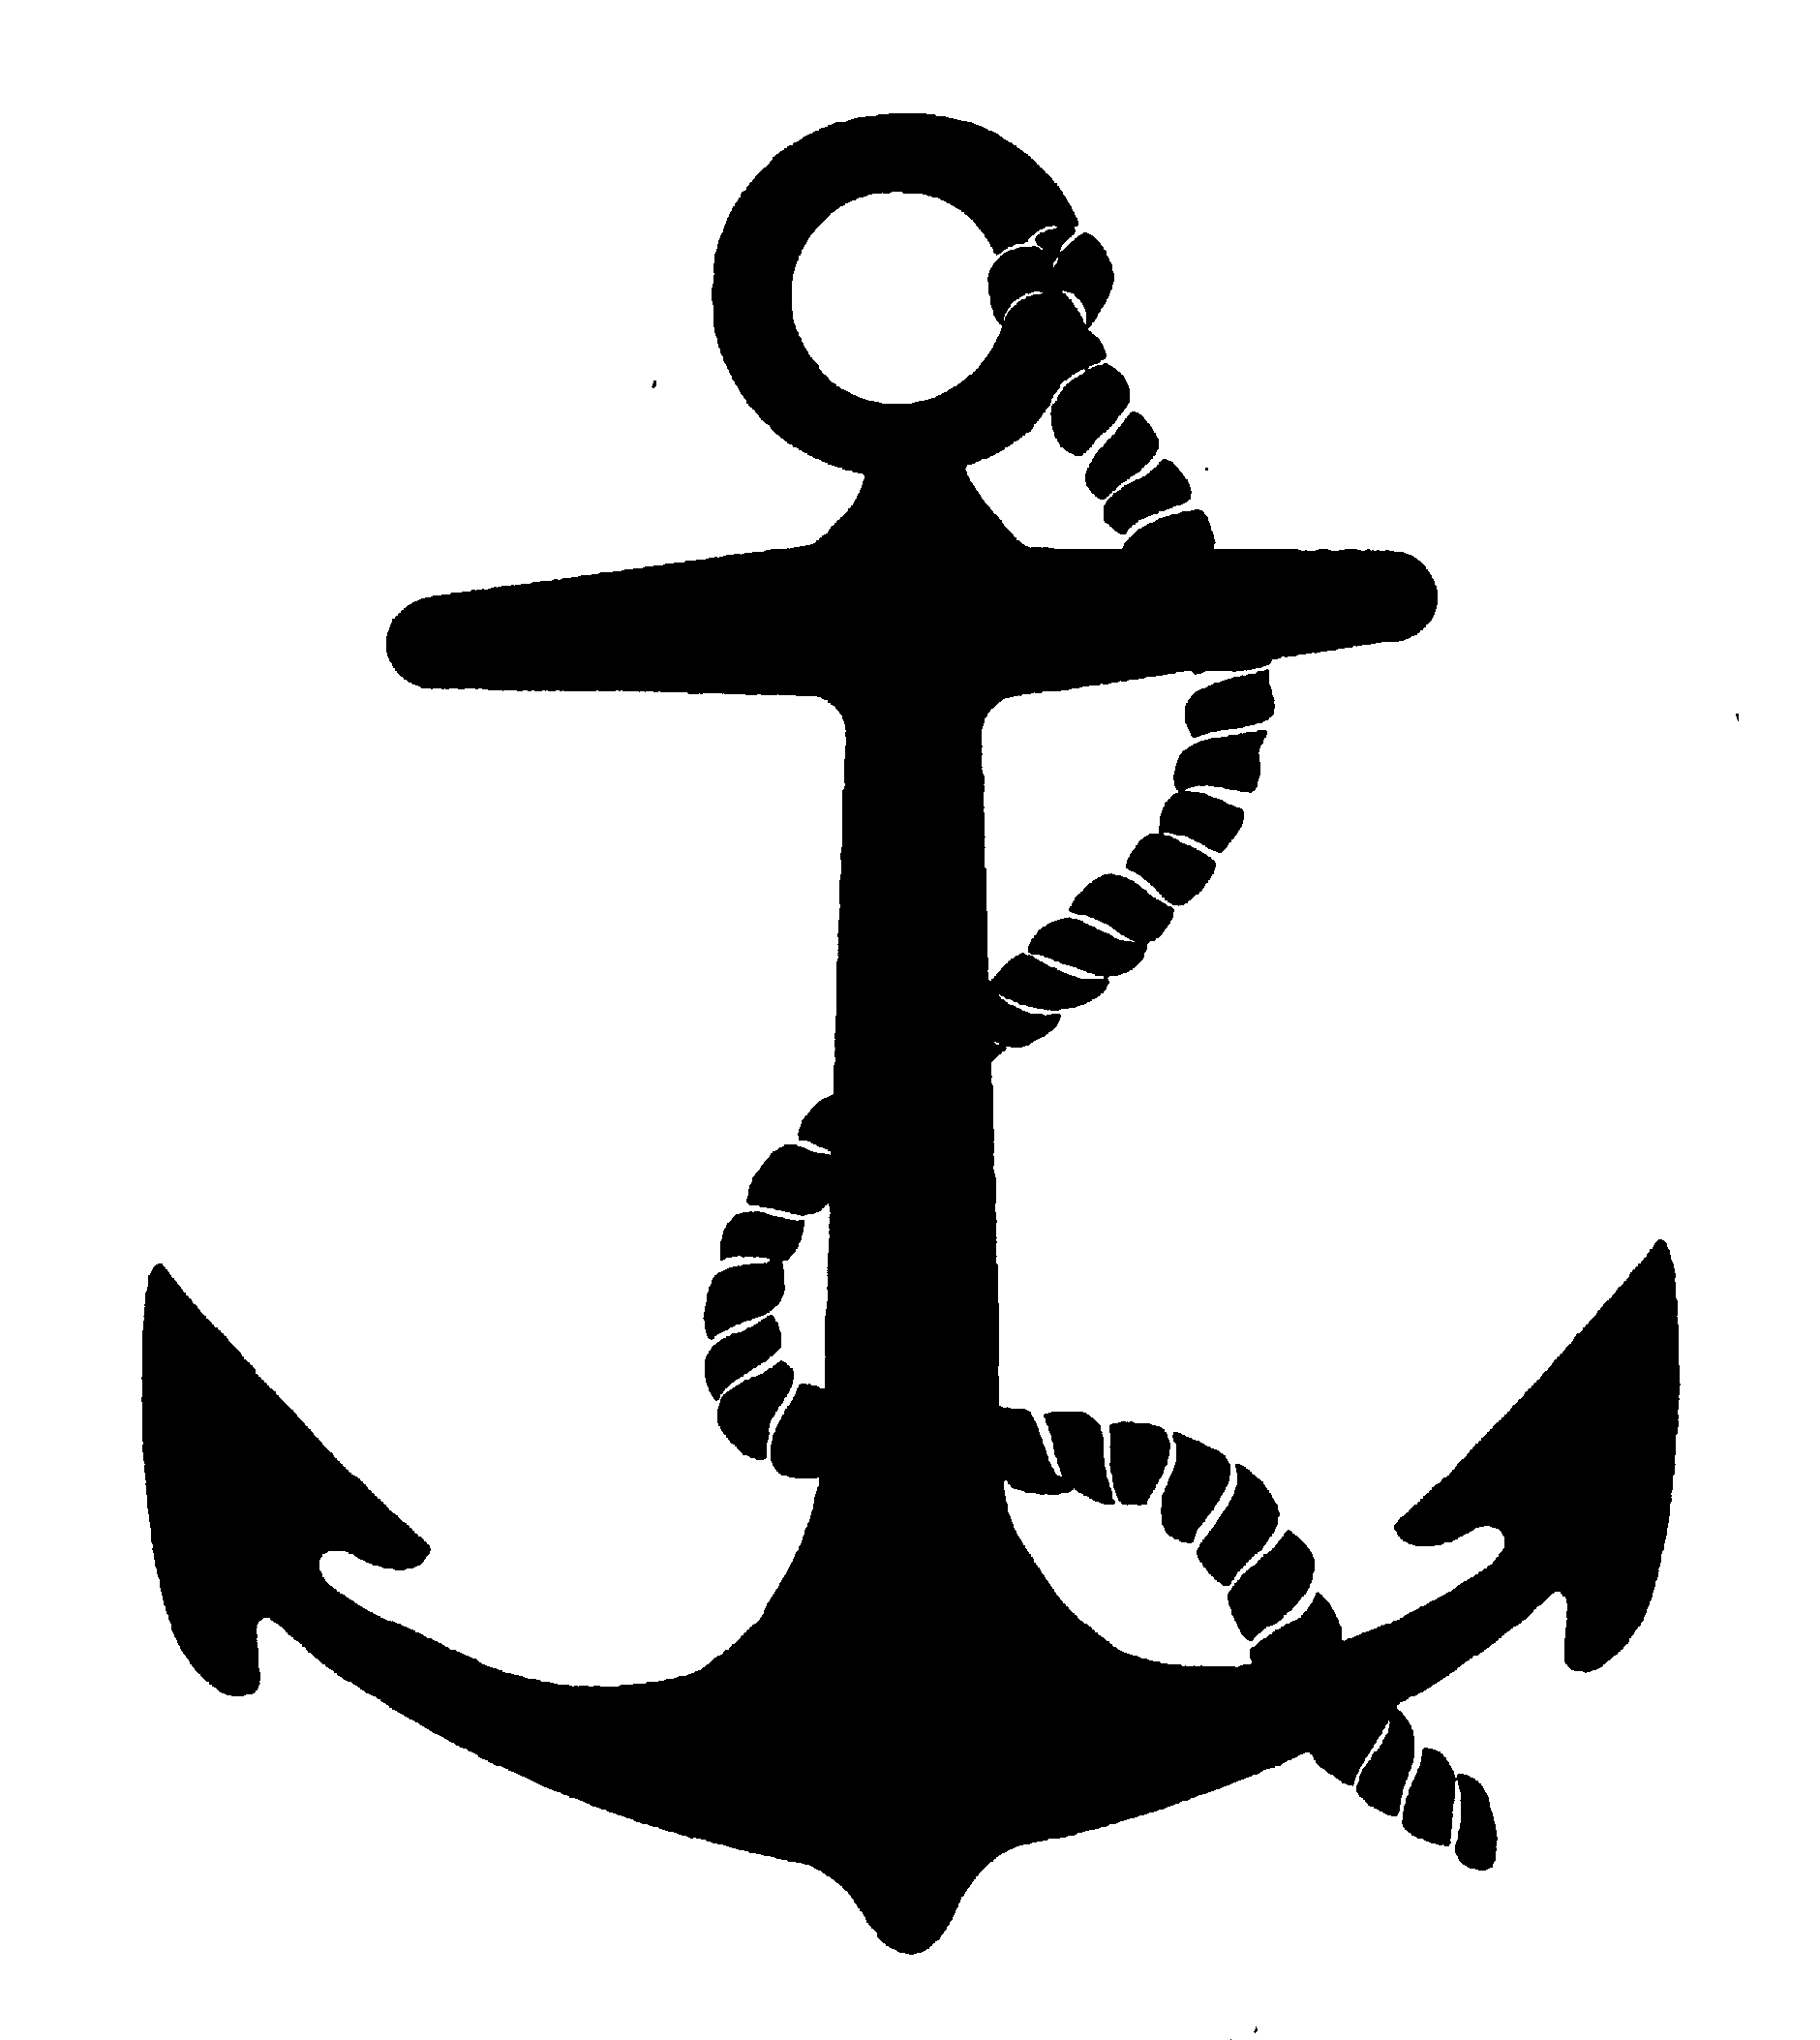 Free Anchor Images, Download Free Clip Art, Free Clip Art on.